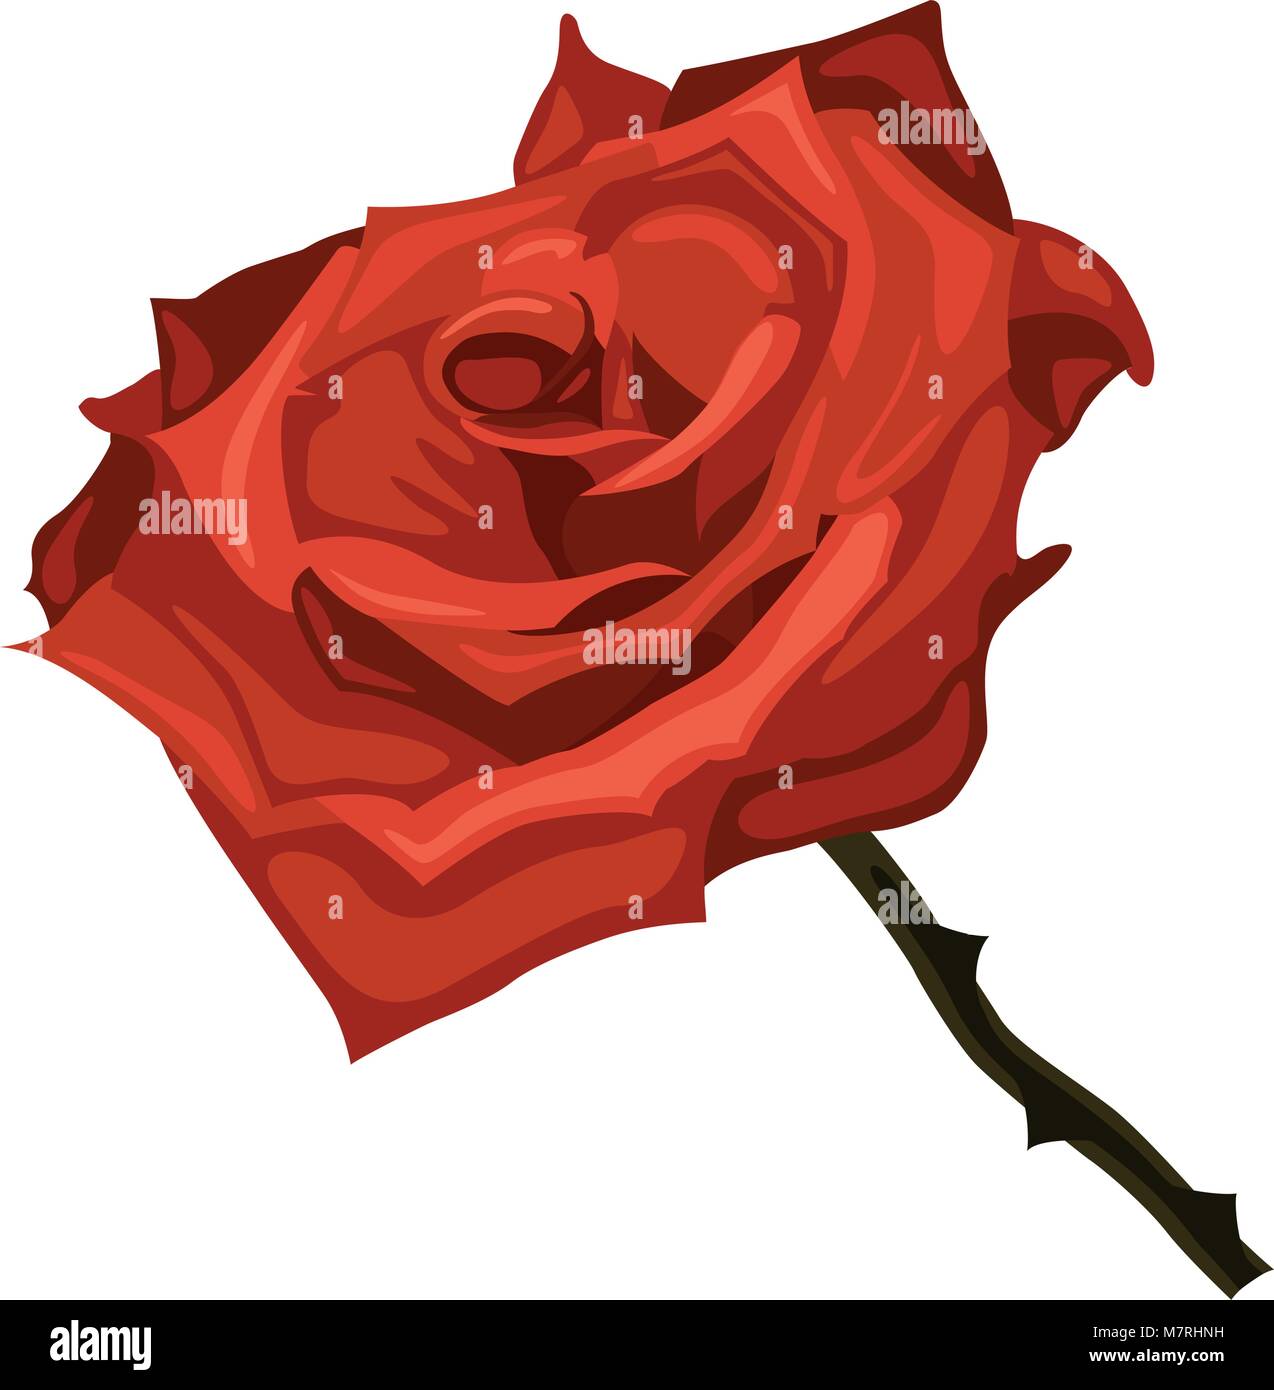 illustration of red rose on a white background Stock Vector